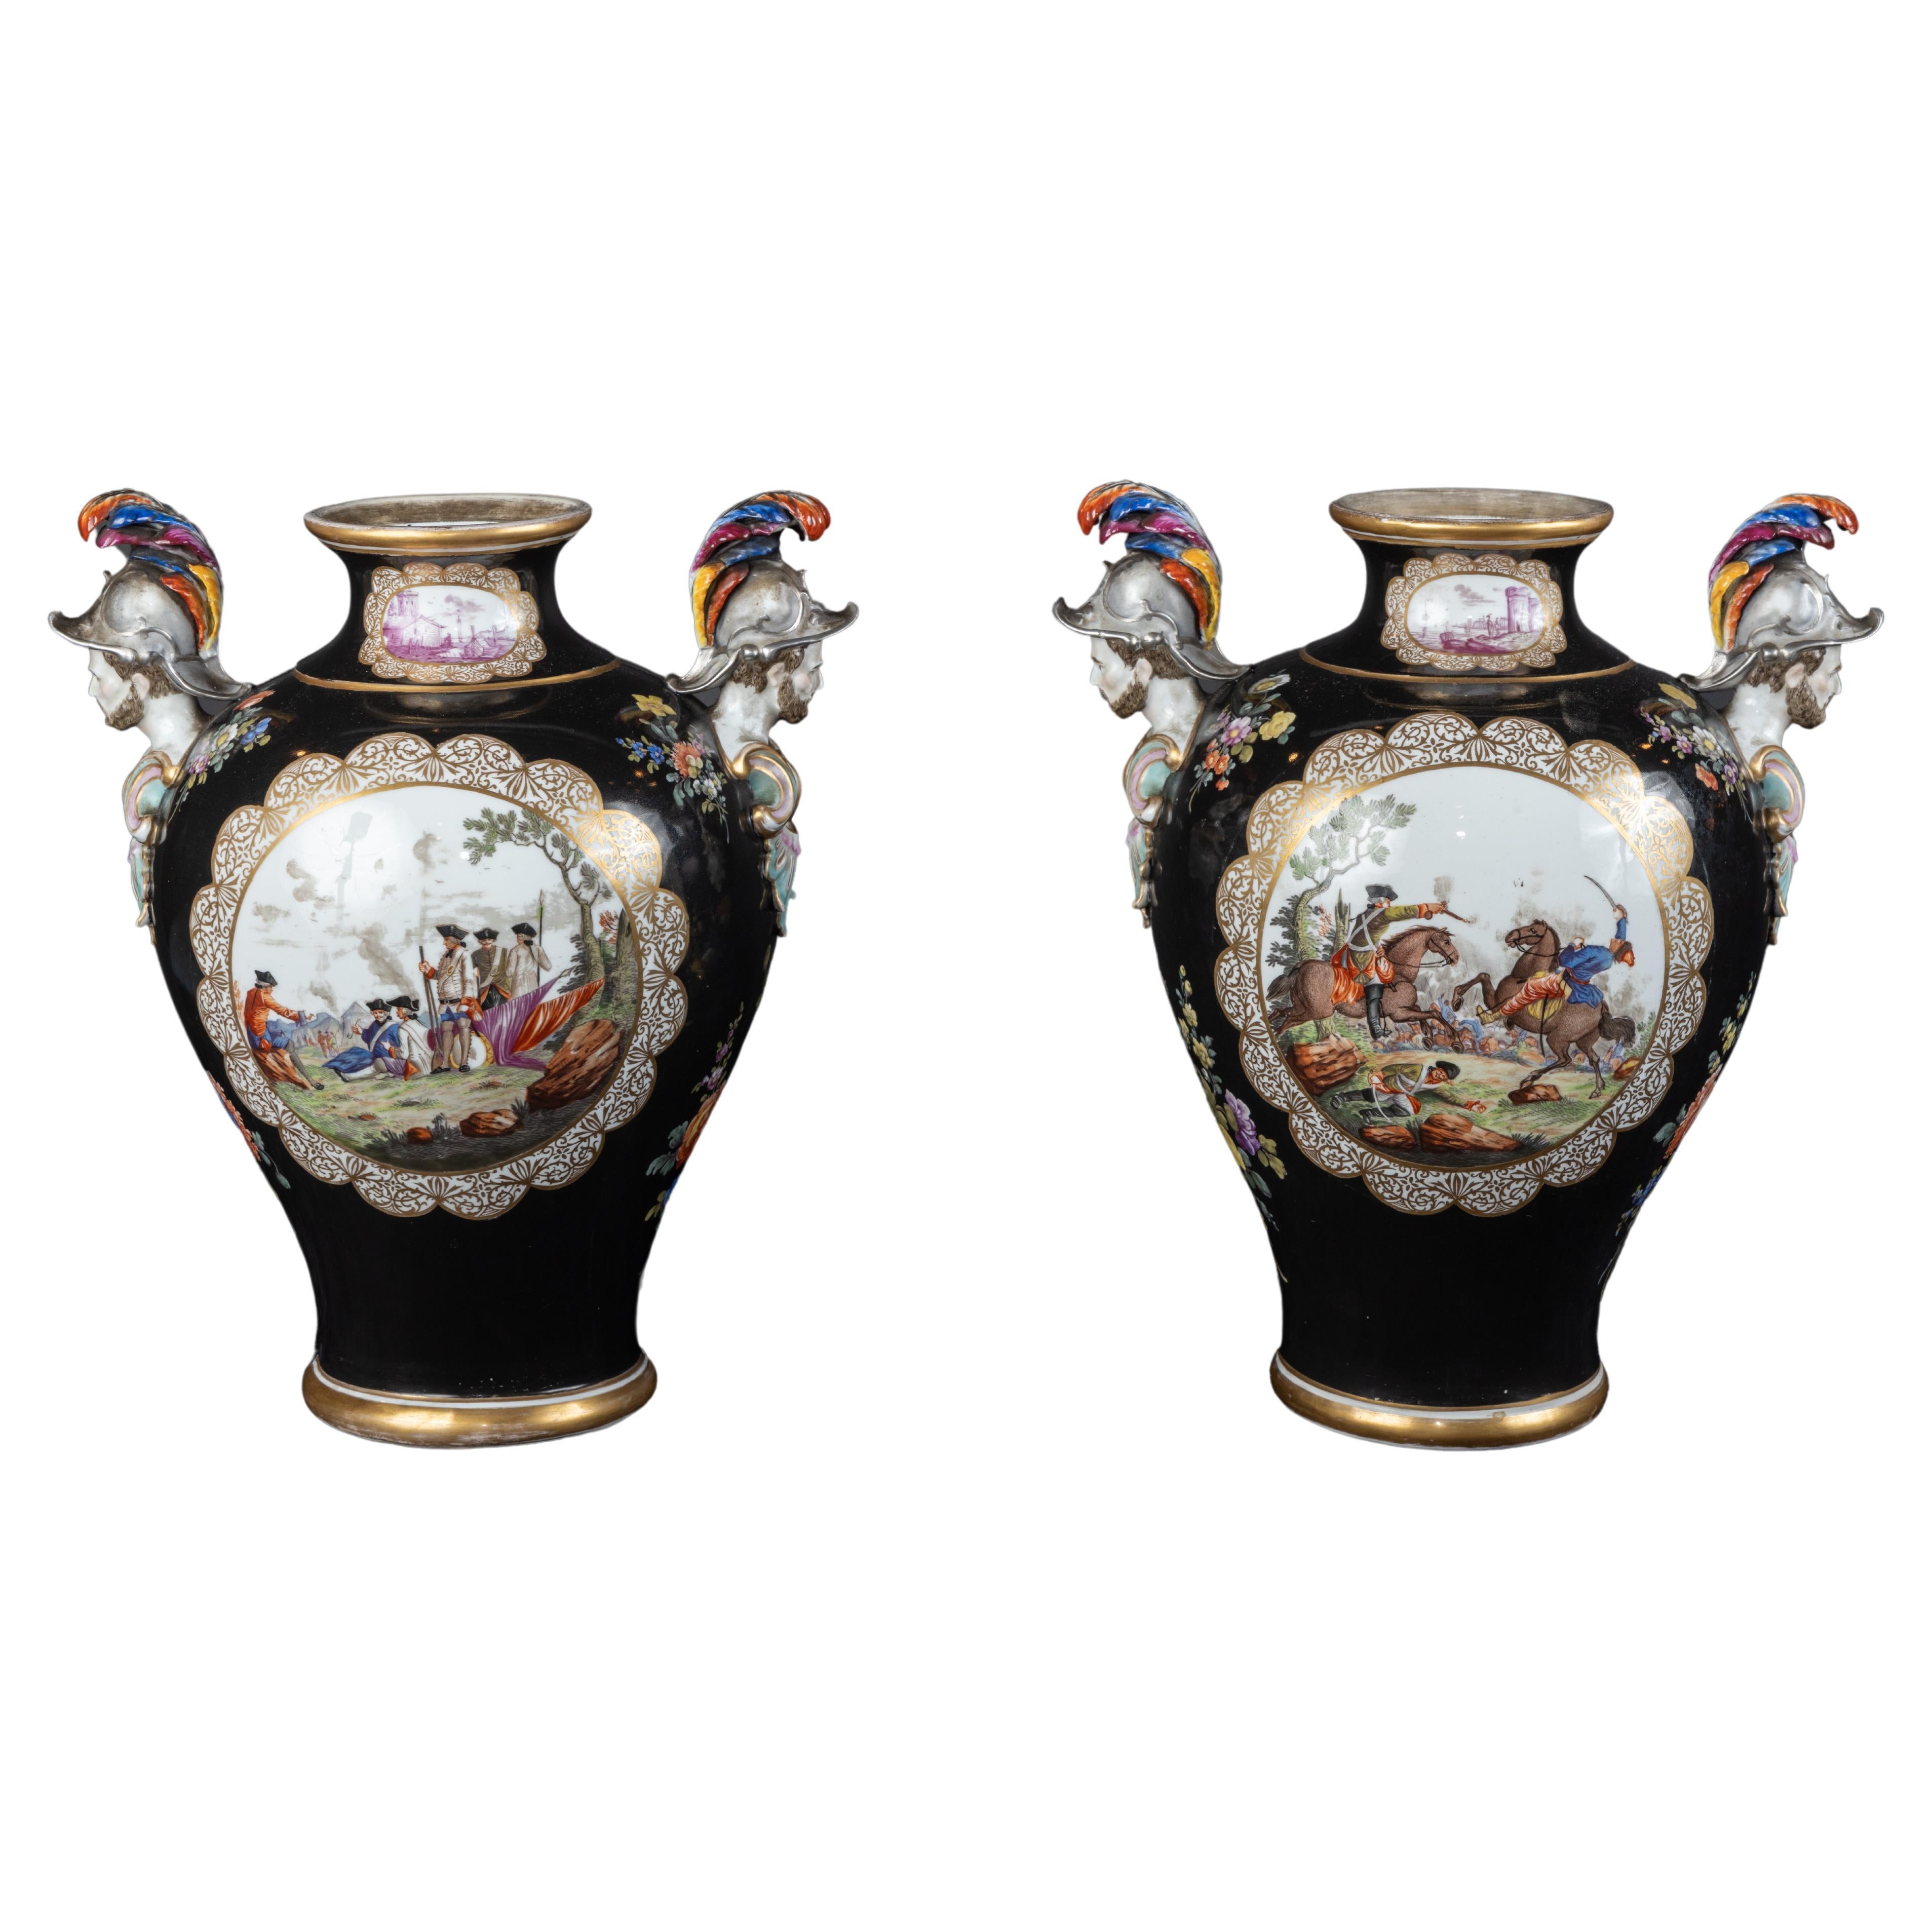 Exquisite Pair of Augustus Rex Porcelain Vases, Early 19th Century, Marked  For Sale